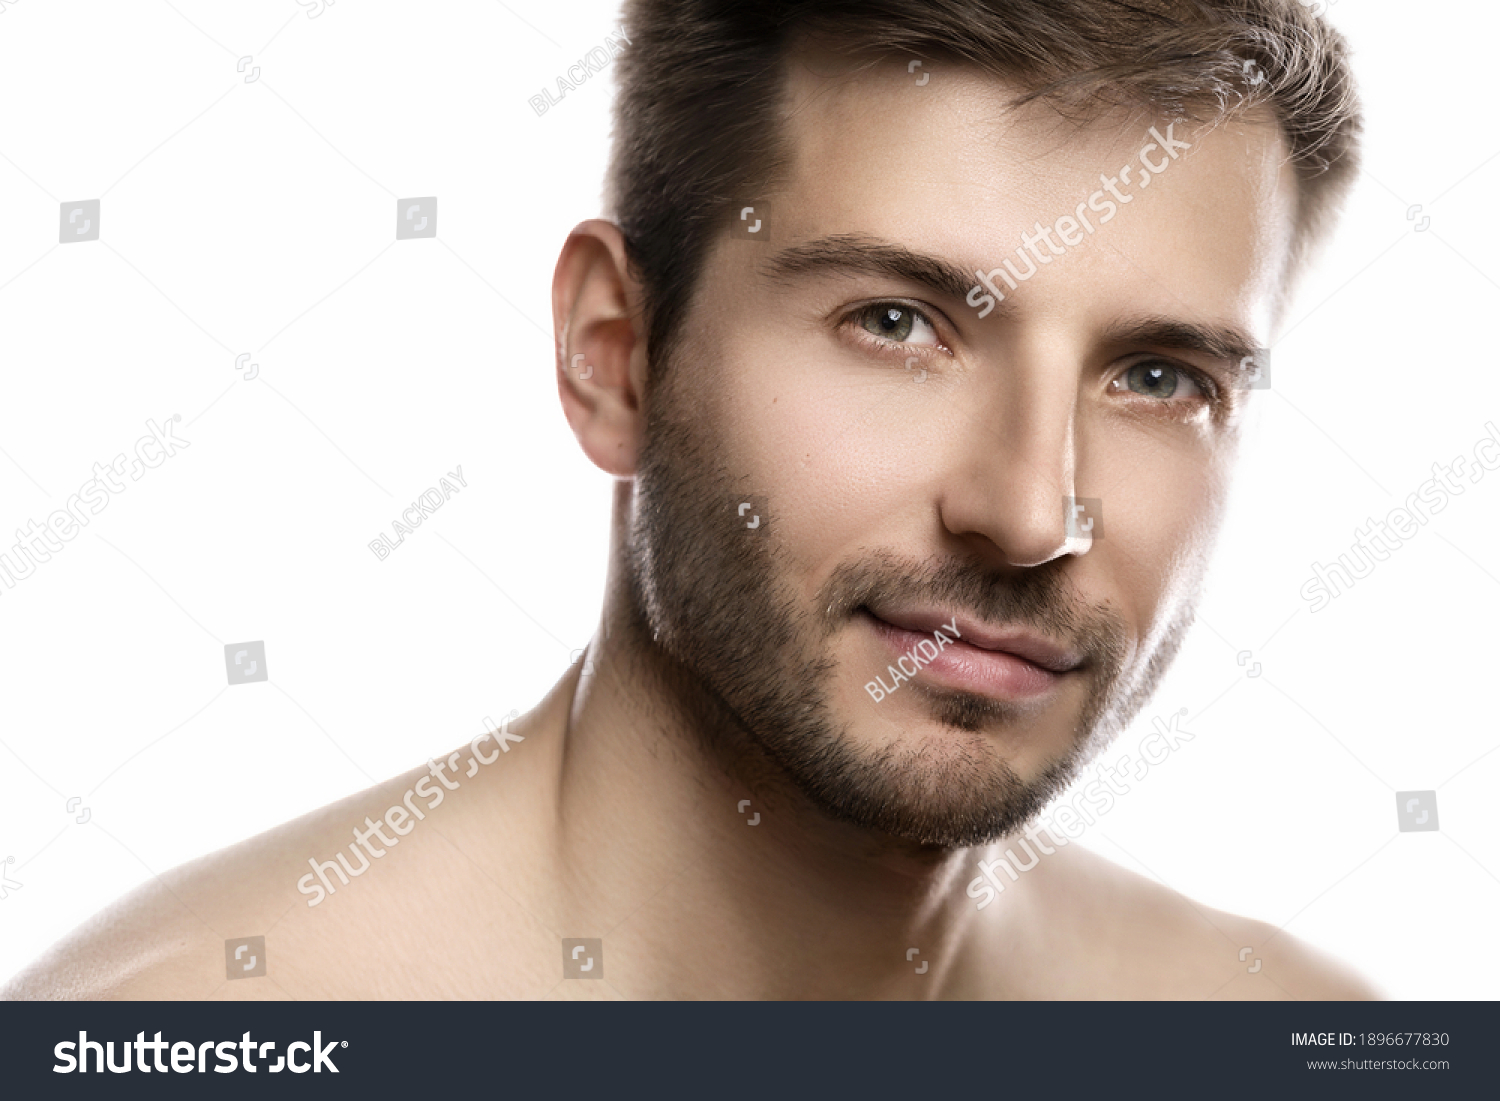 Portrait Young Handsome Man Smooth Skin Stock Photo 1896677830 ...